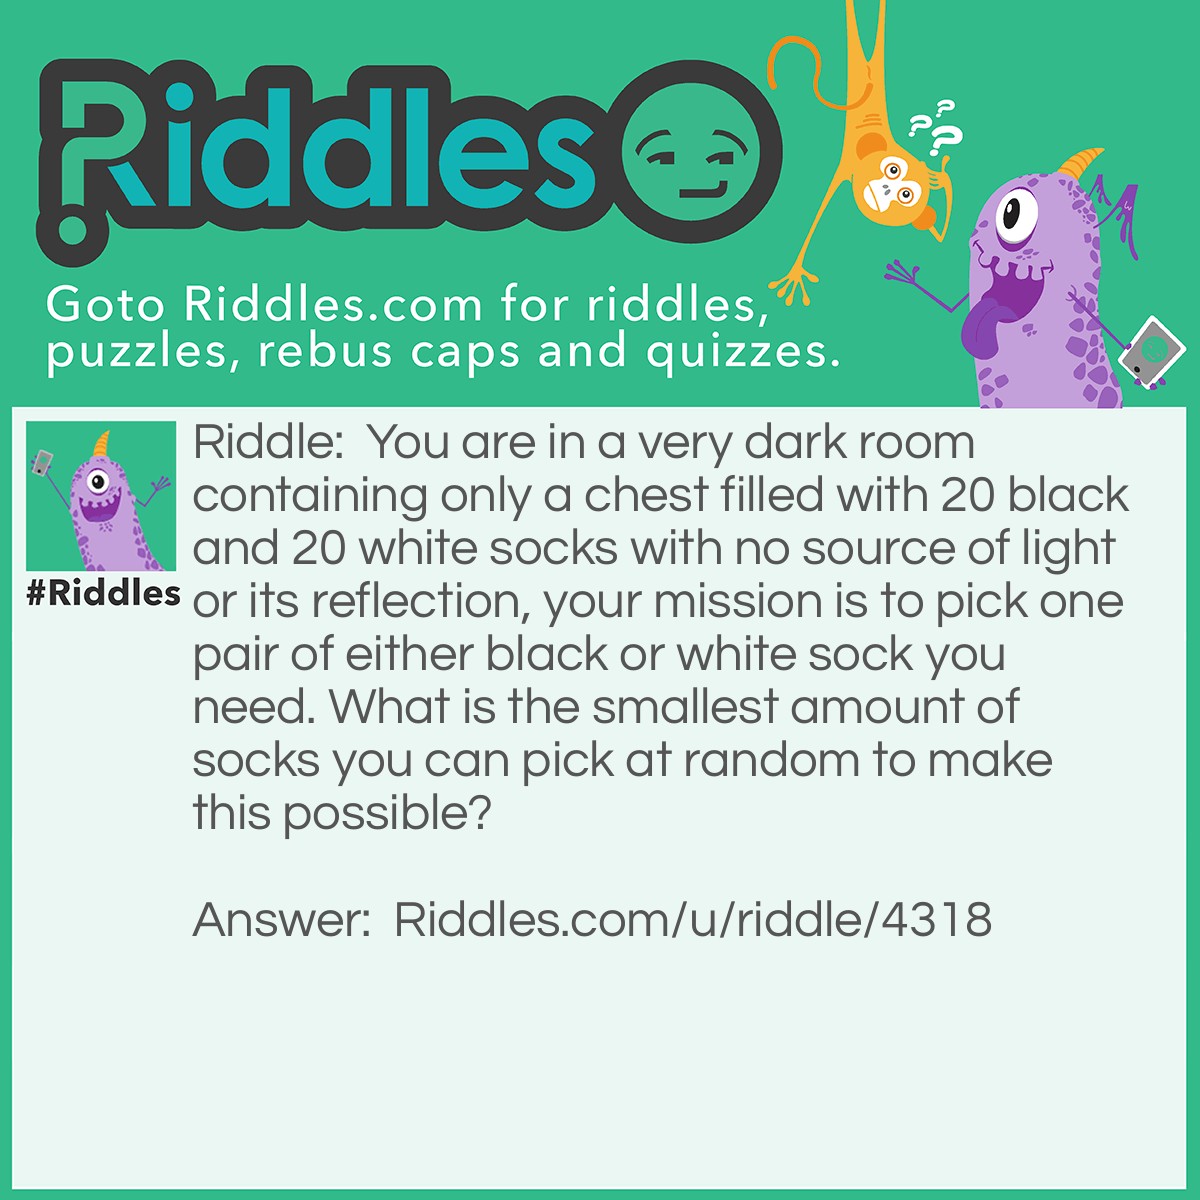 Riddle: You are in a very dark room containing only a chest filled with 20 black and 20 white socks with no source of light or its reflection, your mission is to pick one pair of either black or white sock you need. What is the smallest amount of socks you can pick at random to make this possible? Answer: Three. It means you picked only one pair of either black or white sock and one black or white sock.